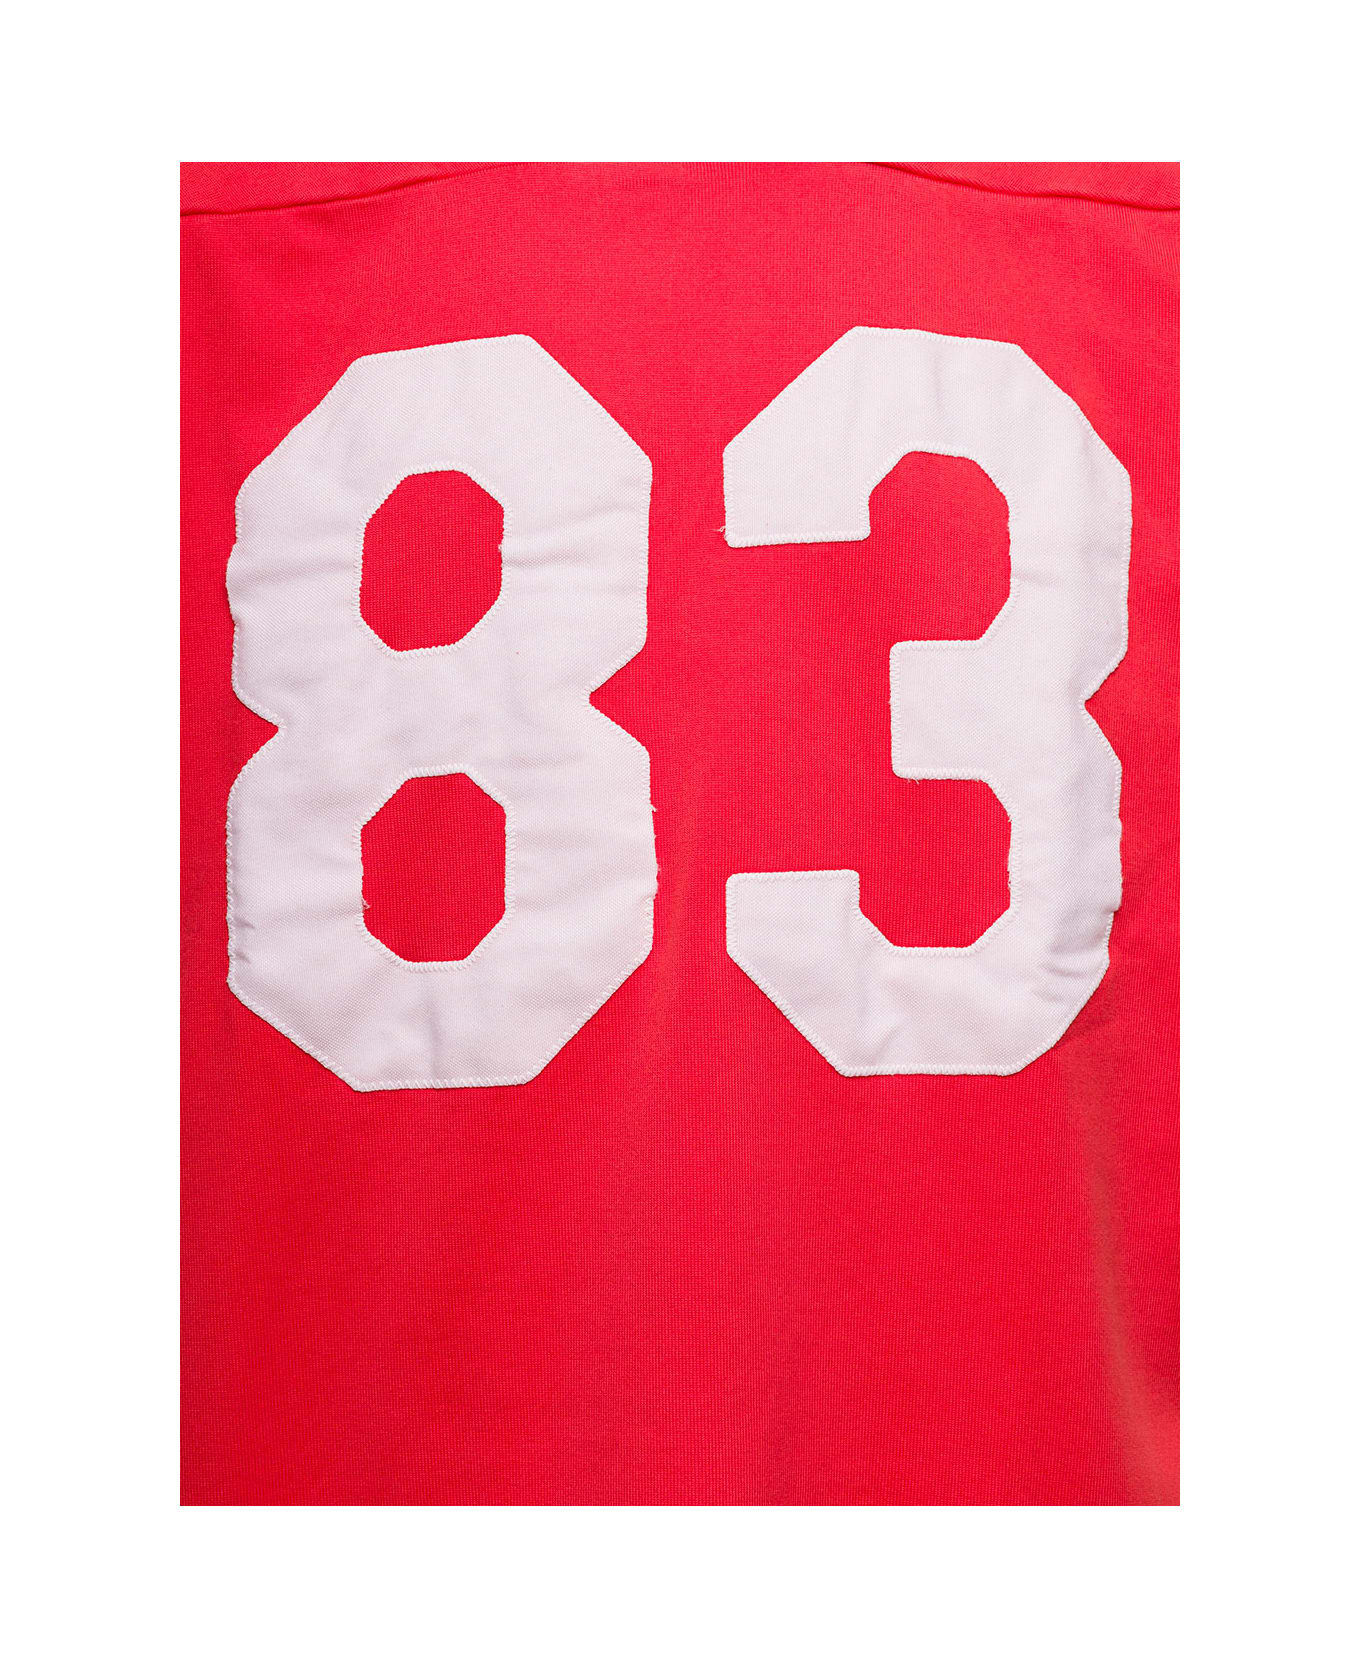 ERL Red Football T-shirt With 83 Print In Cotton - Red